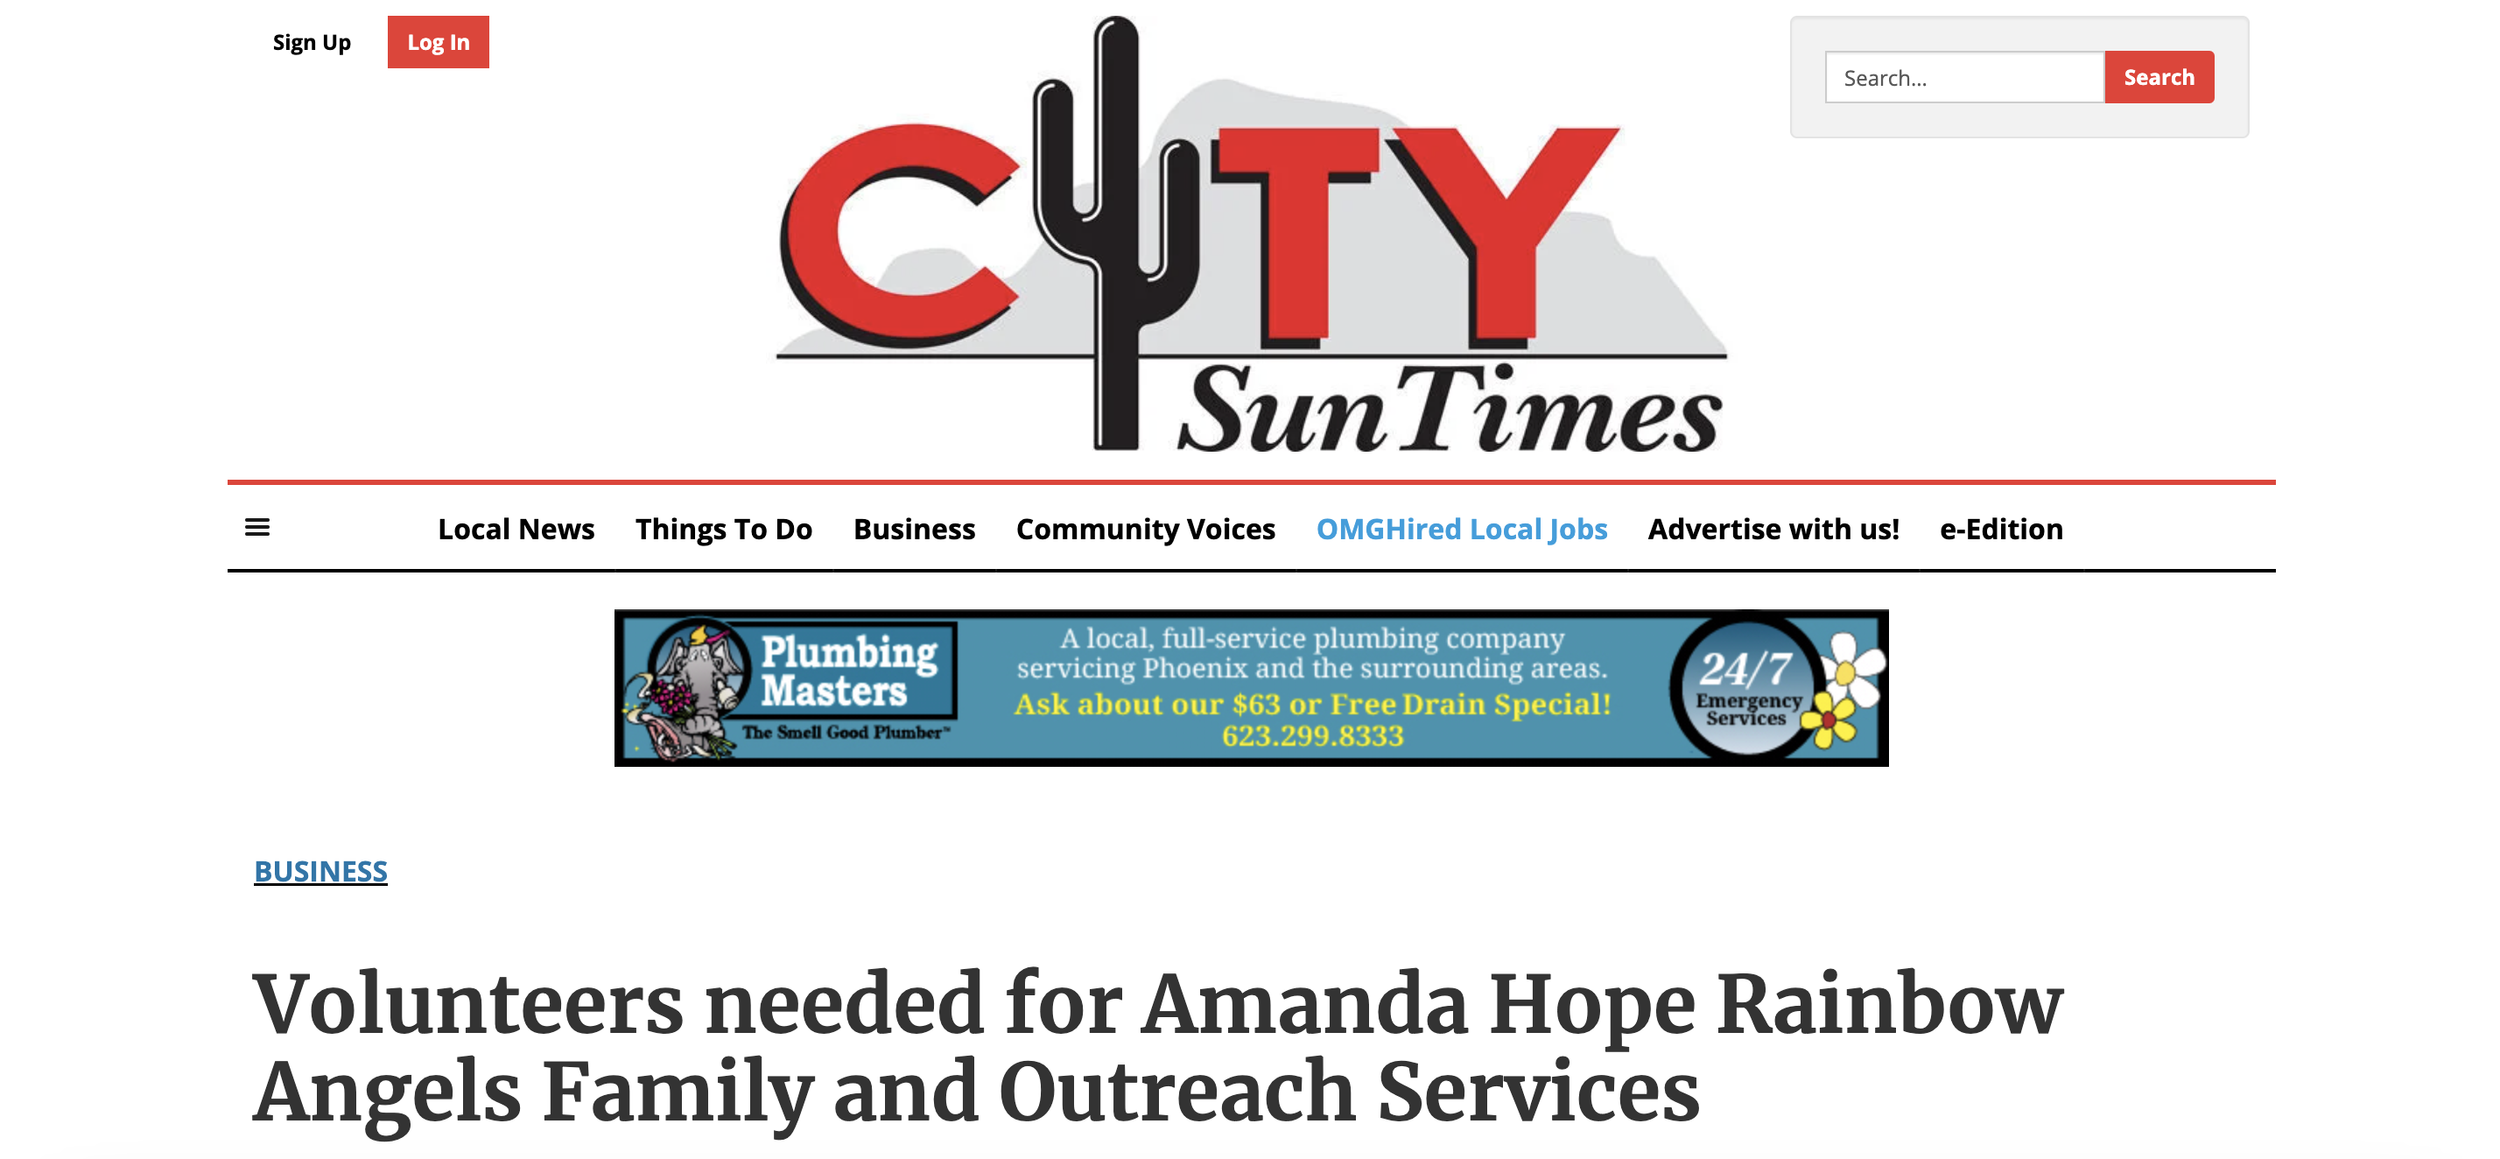 City Sun Times: Volunteers needed for Amanda Hope Rainbow Angels Family and Outreach Services 